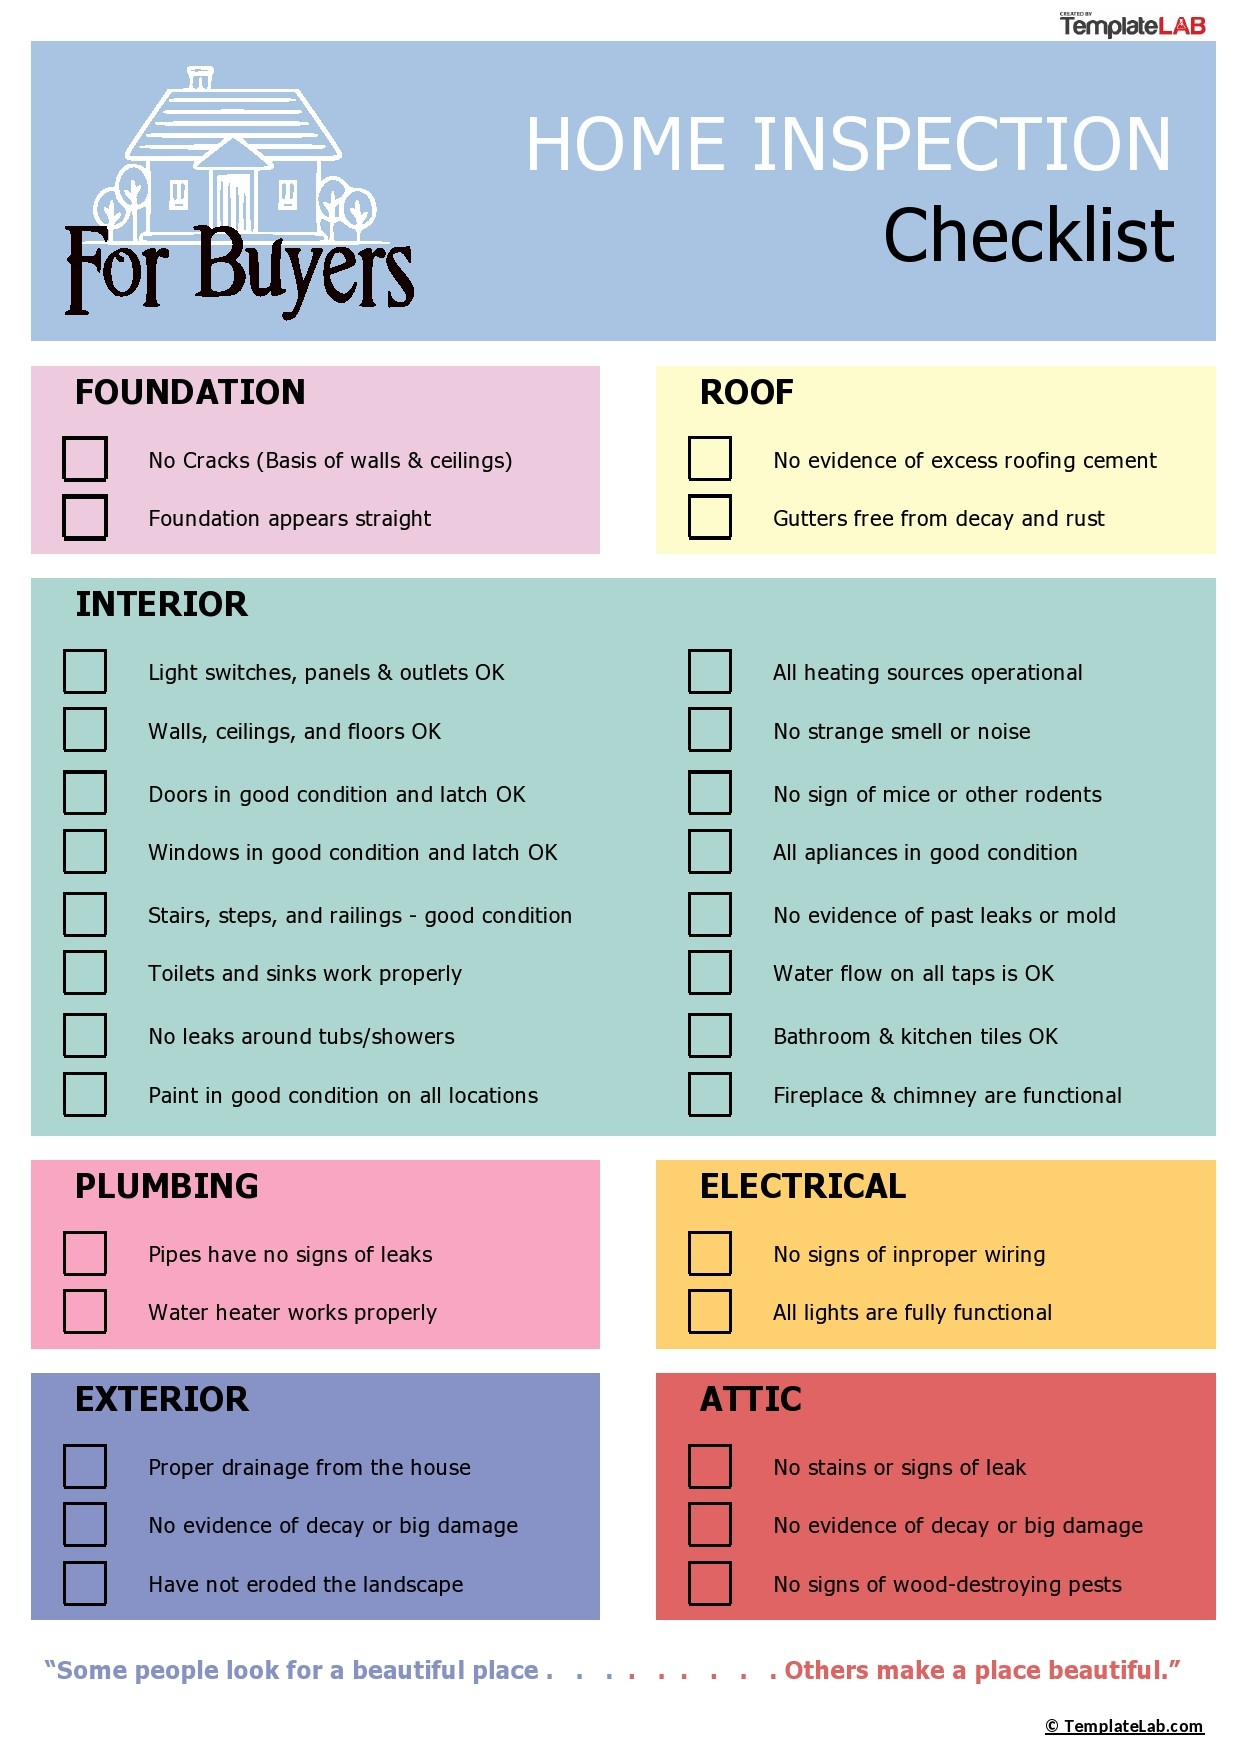 10+ Printable Home Inspection Checklists (Word, PDF) ᐅ TemplateLab For Home Inspection Checklist Template Inside Home Inspection Checklist Template